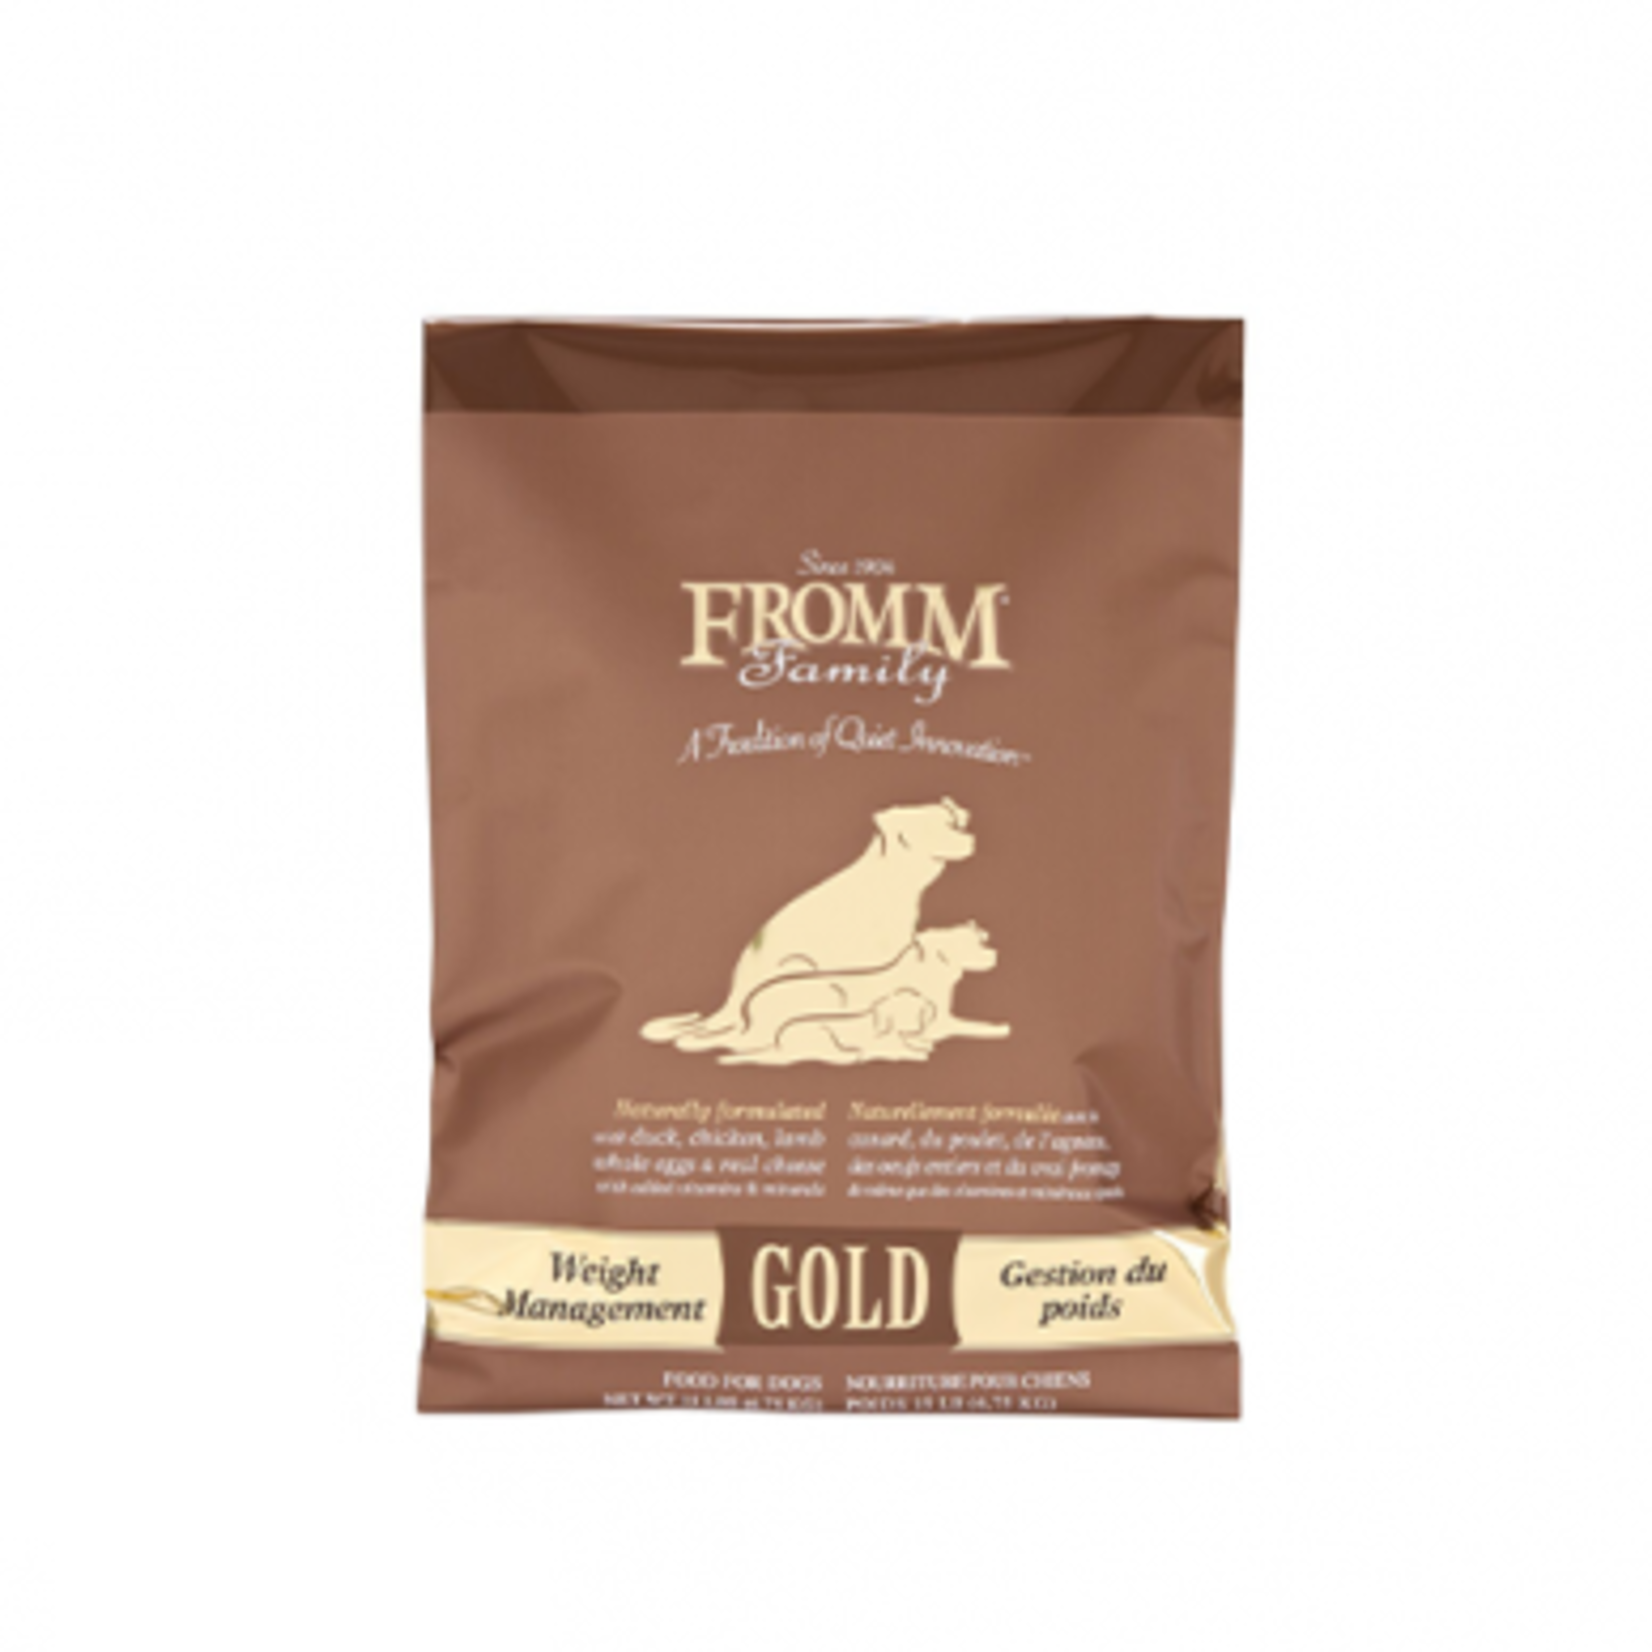 Fromm Gold - Gestion du poids - 15 lbs